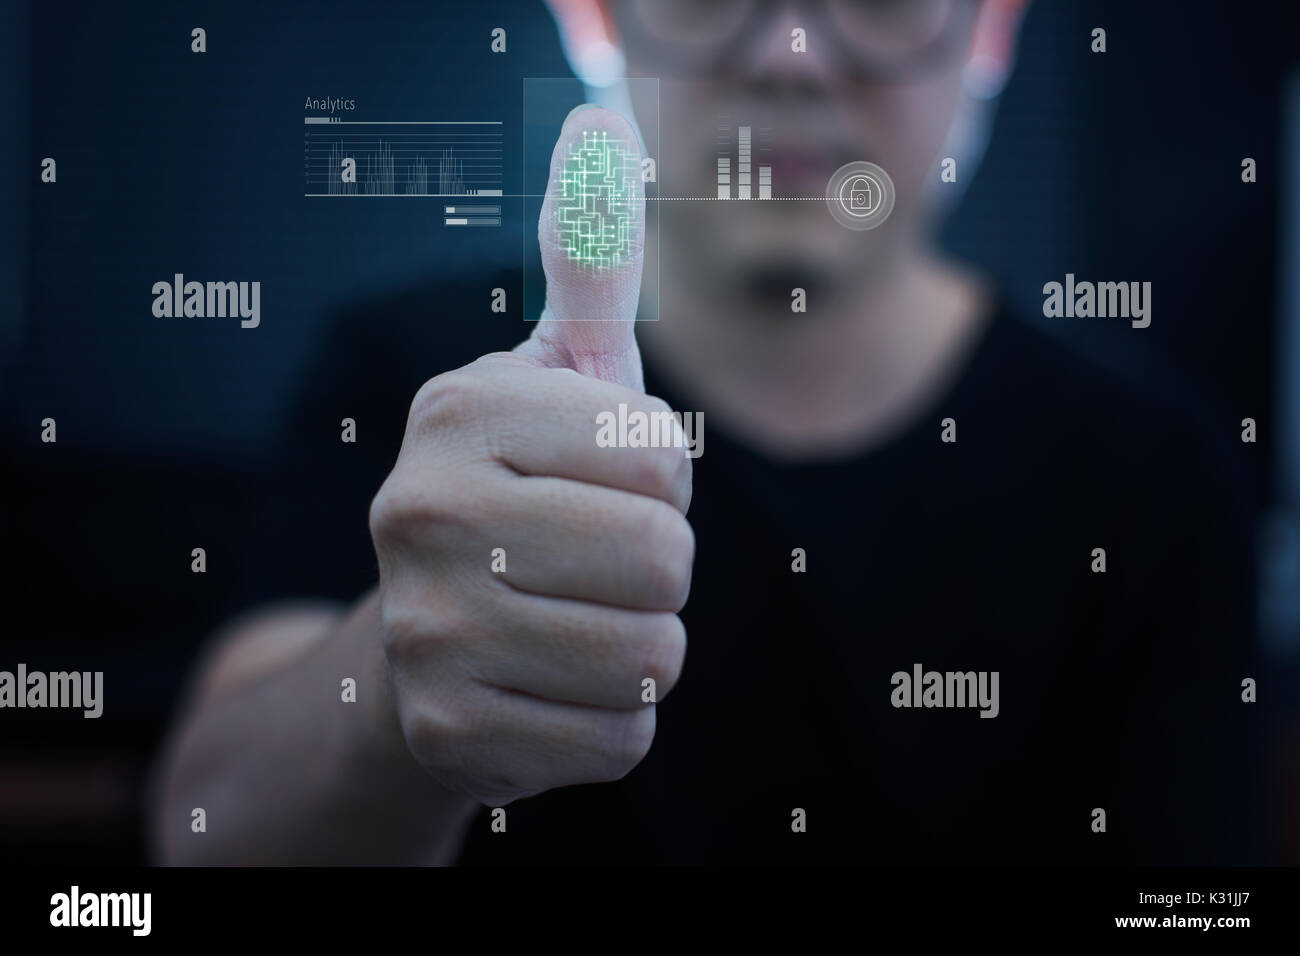 Young businessman scan fingerprint for identity analytics , concept of the internet and future immersive technology for business security . Stock Photo